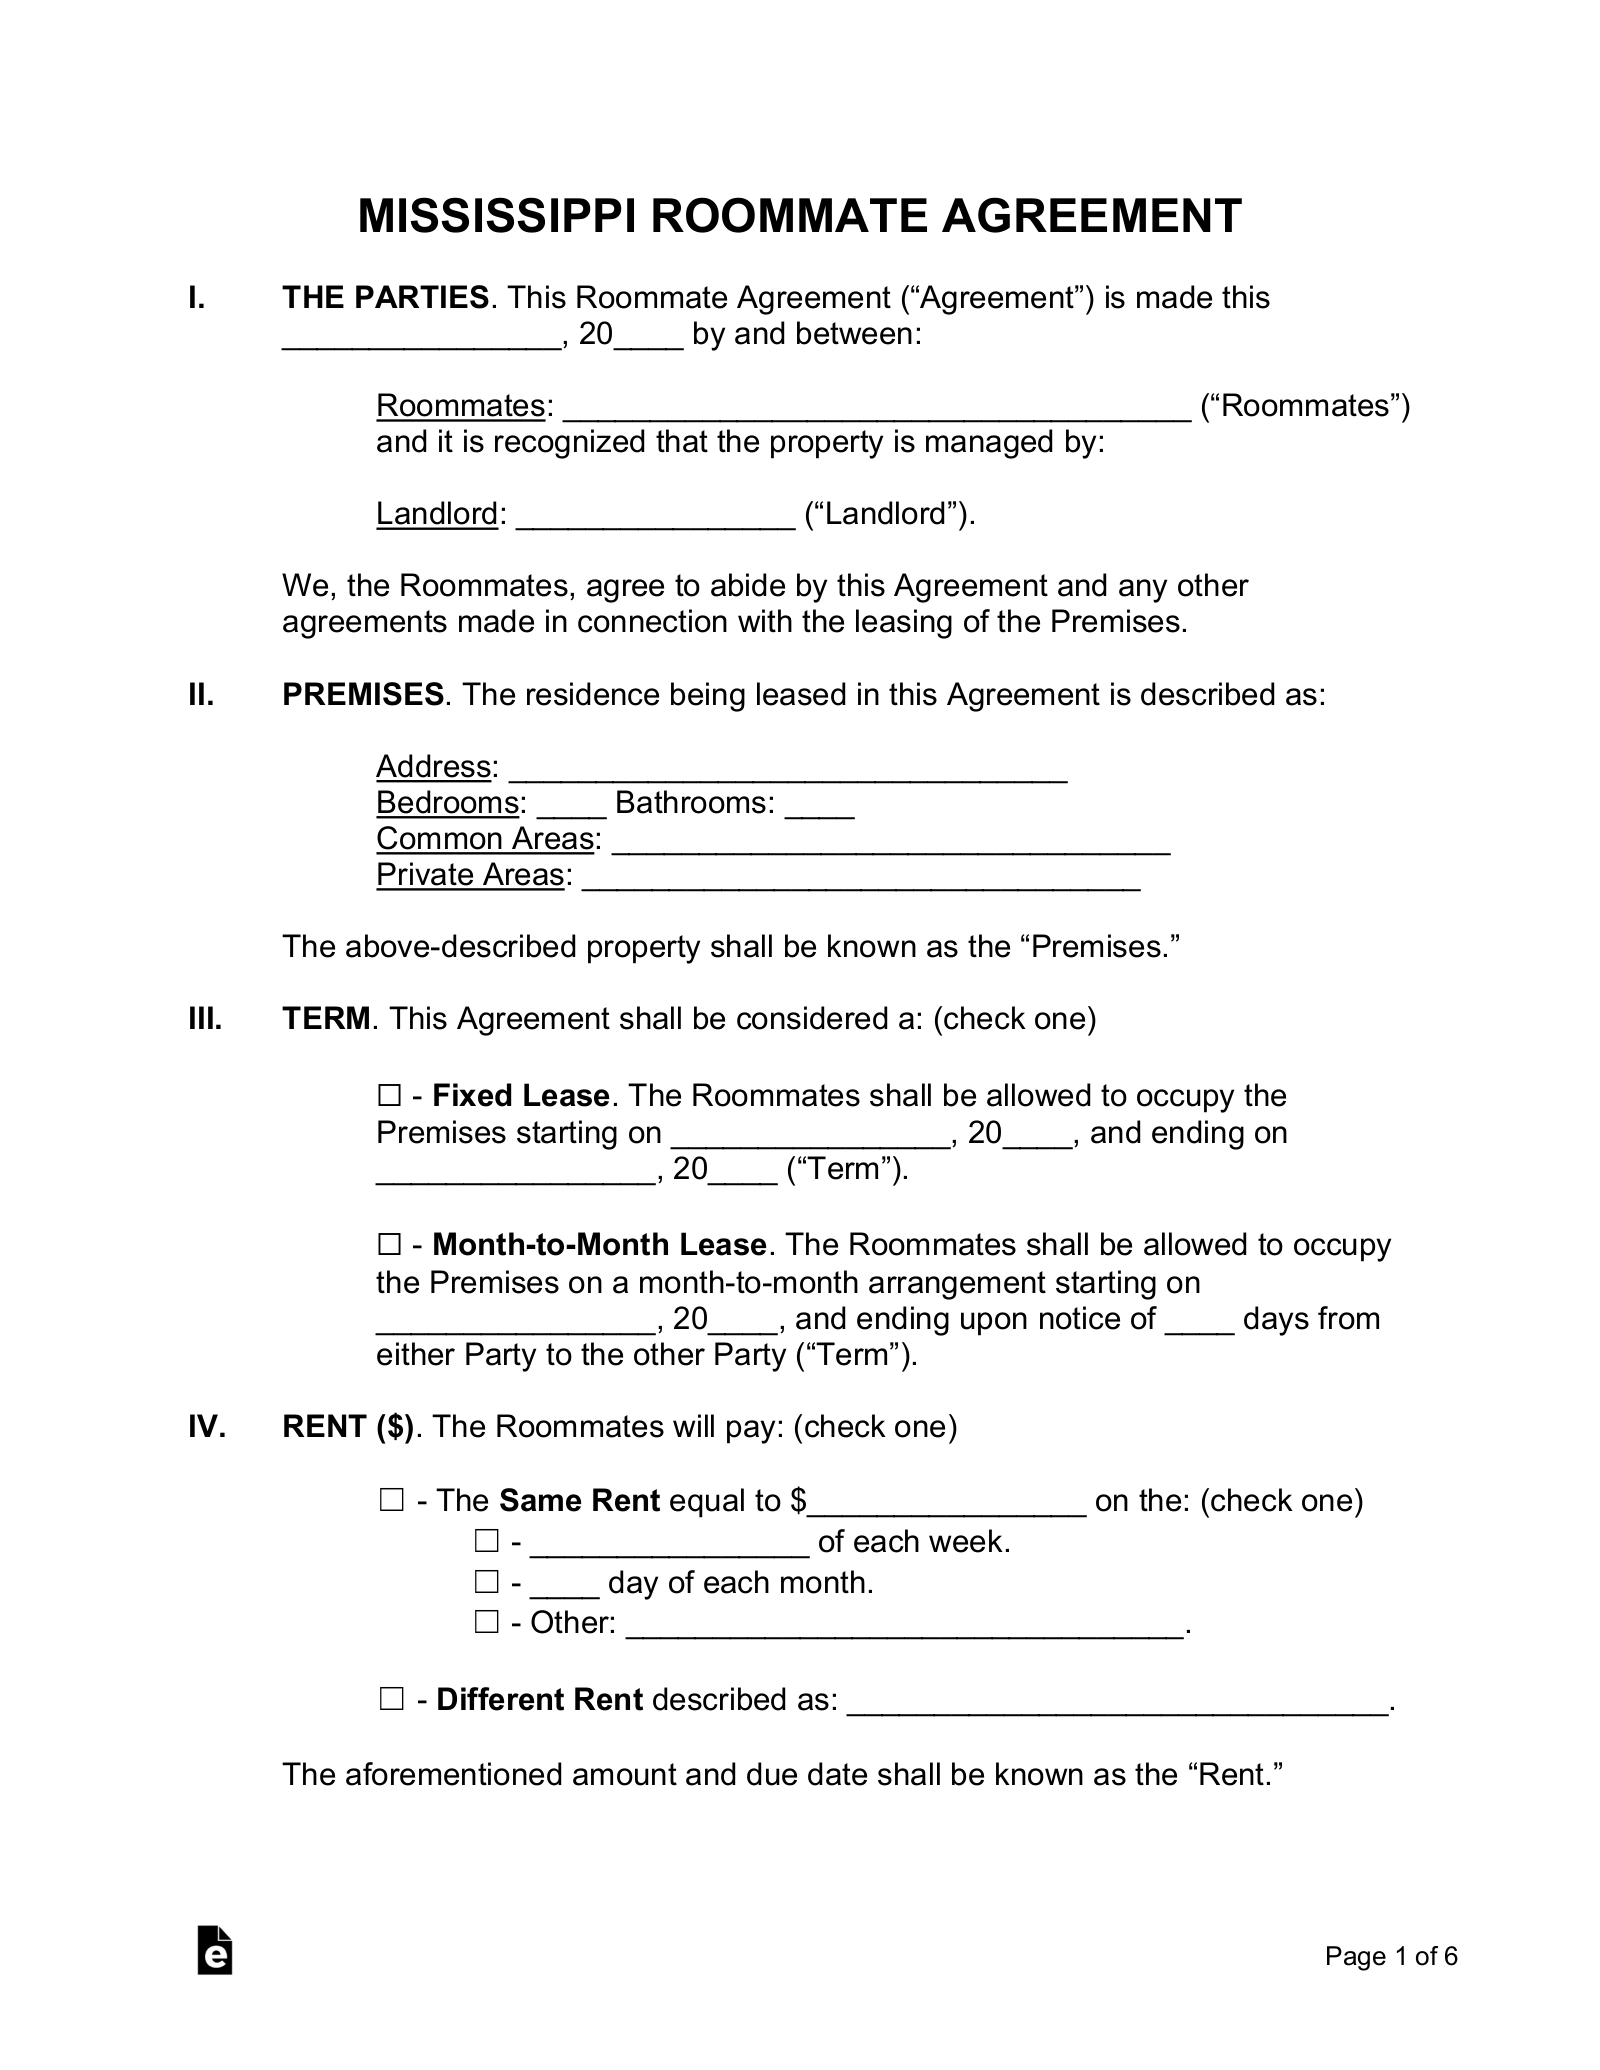 Mississippi Roommate Agreement Form